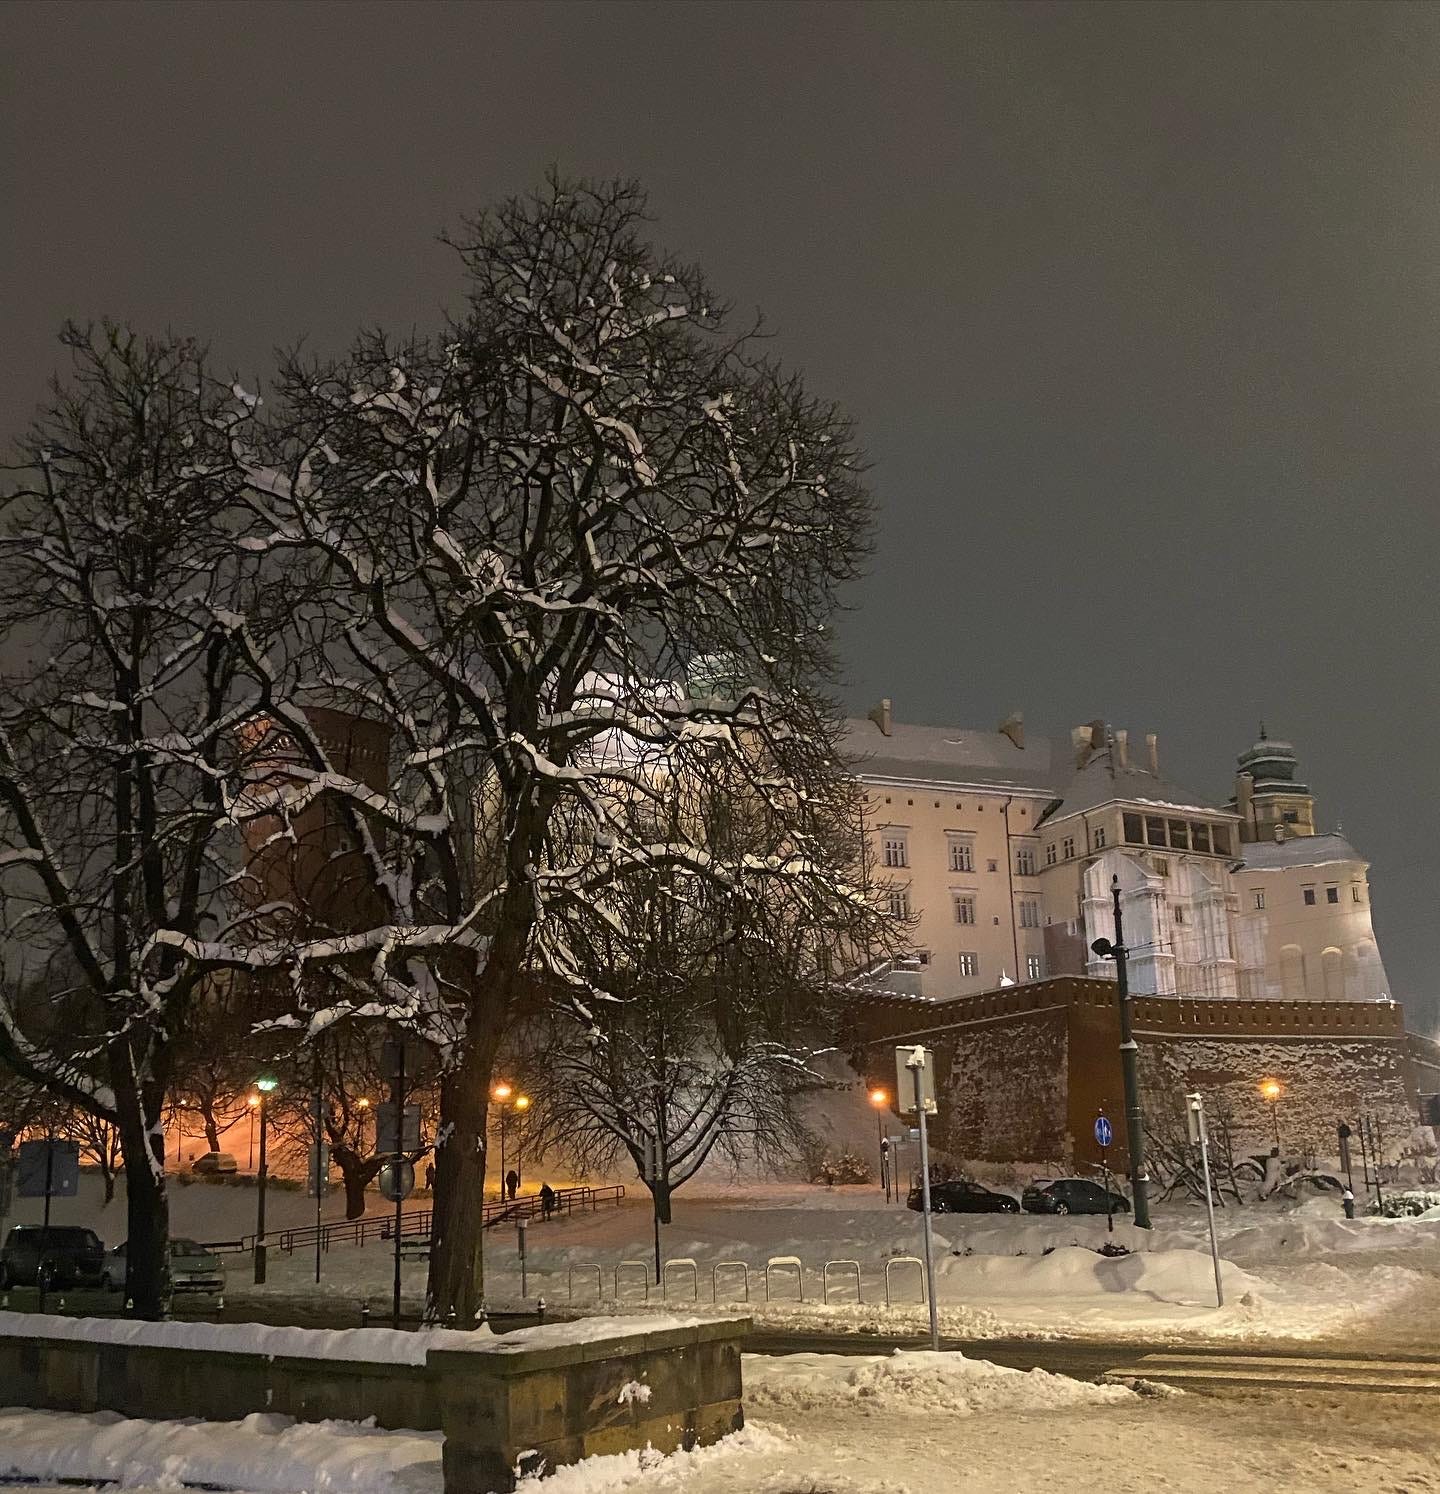 A snowy scene. A building looms in the background. In the foreground, there is a snow-covered tree. It is night. Street lamps are on.